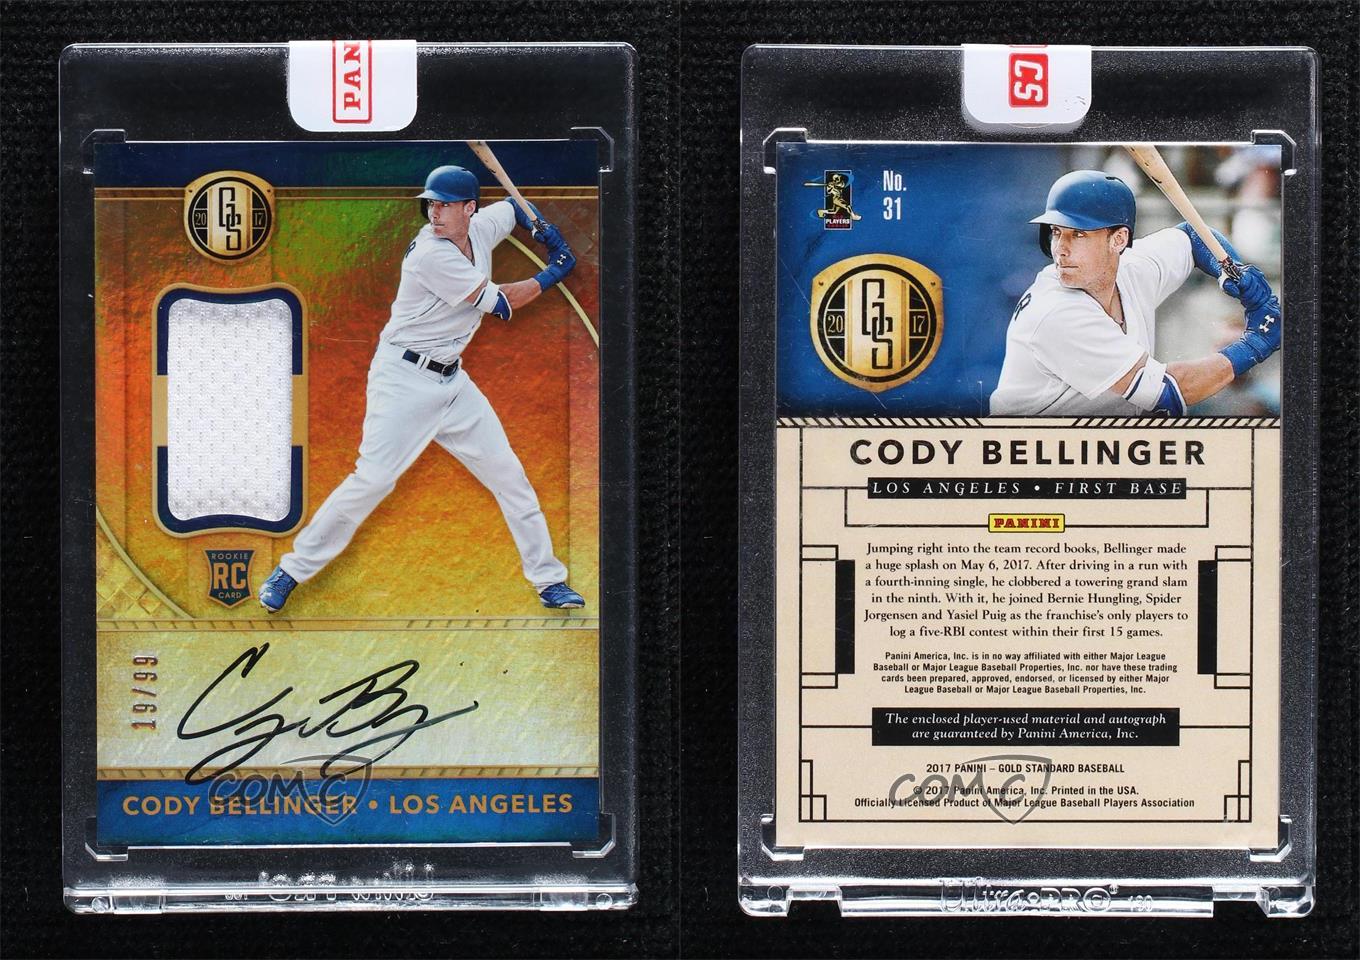 2017 Panini Chronicles Gold Standard Jersey /99 Cody Bellinger Rookie Auto  RC